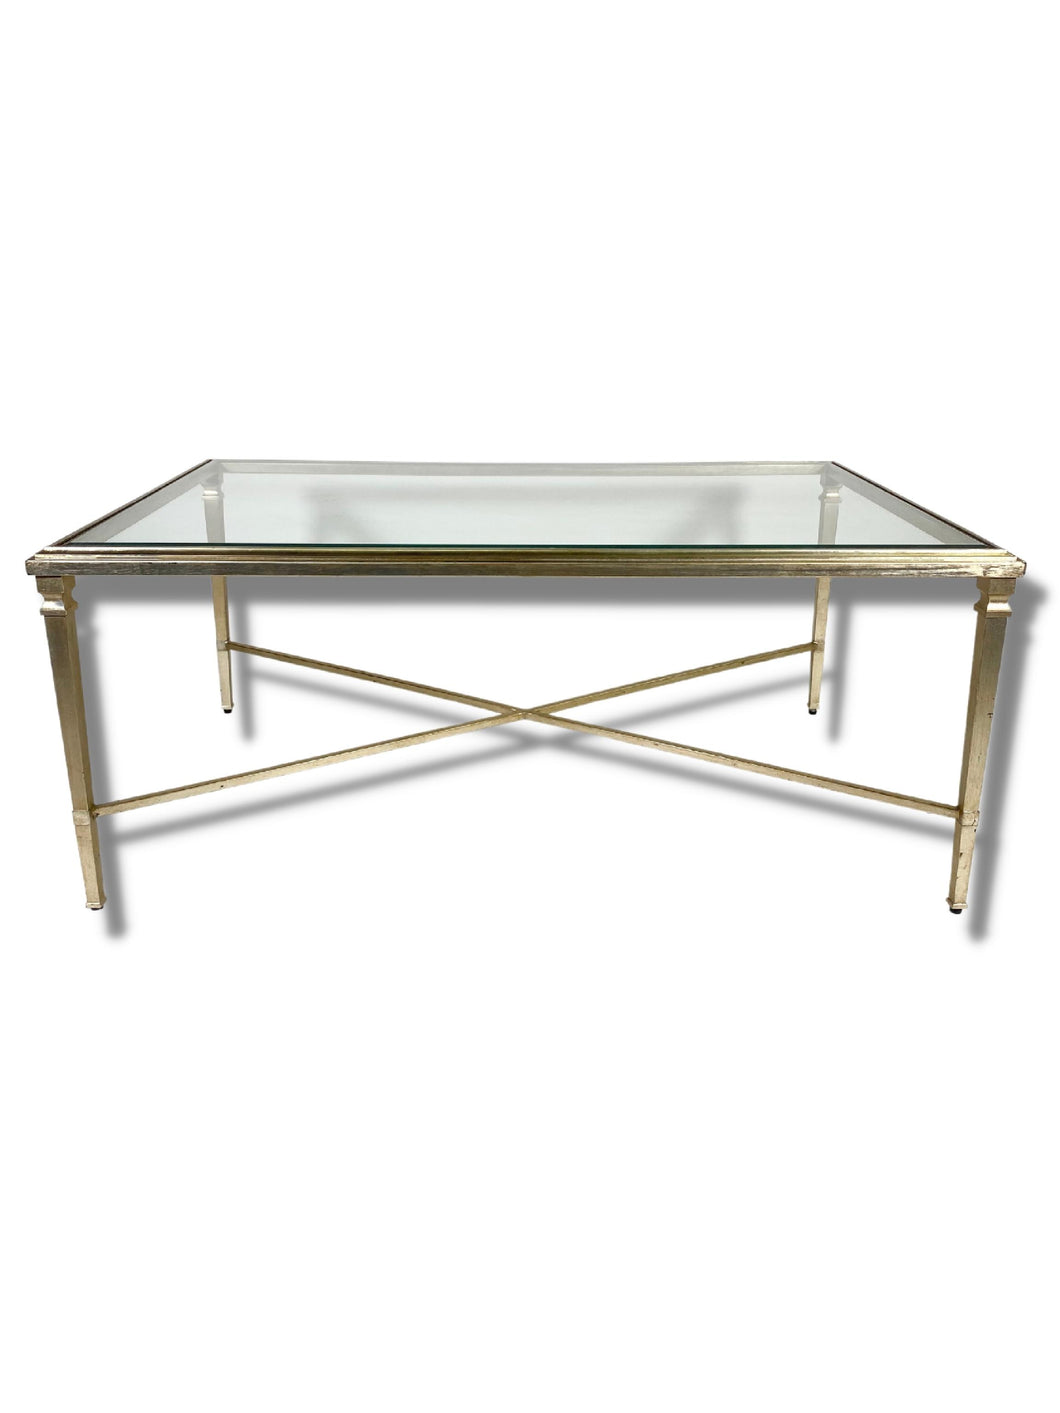 Silvered Iron Coffee Table